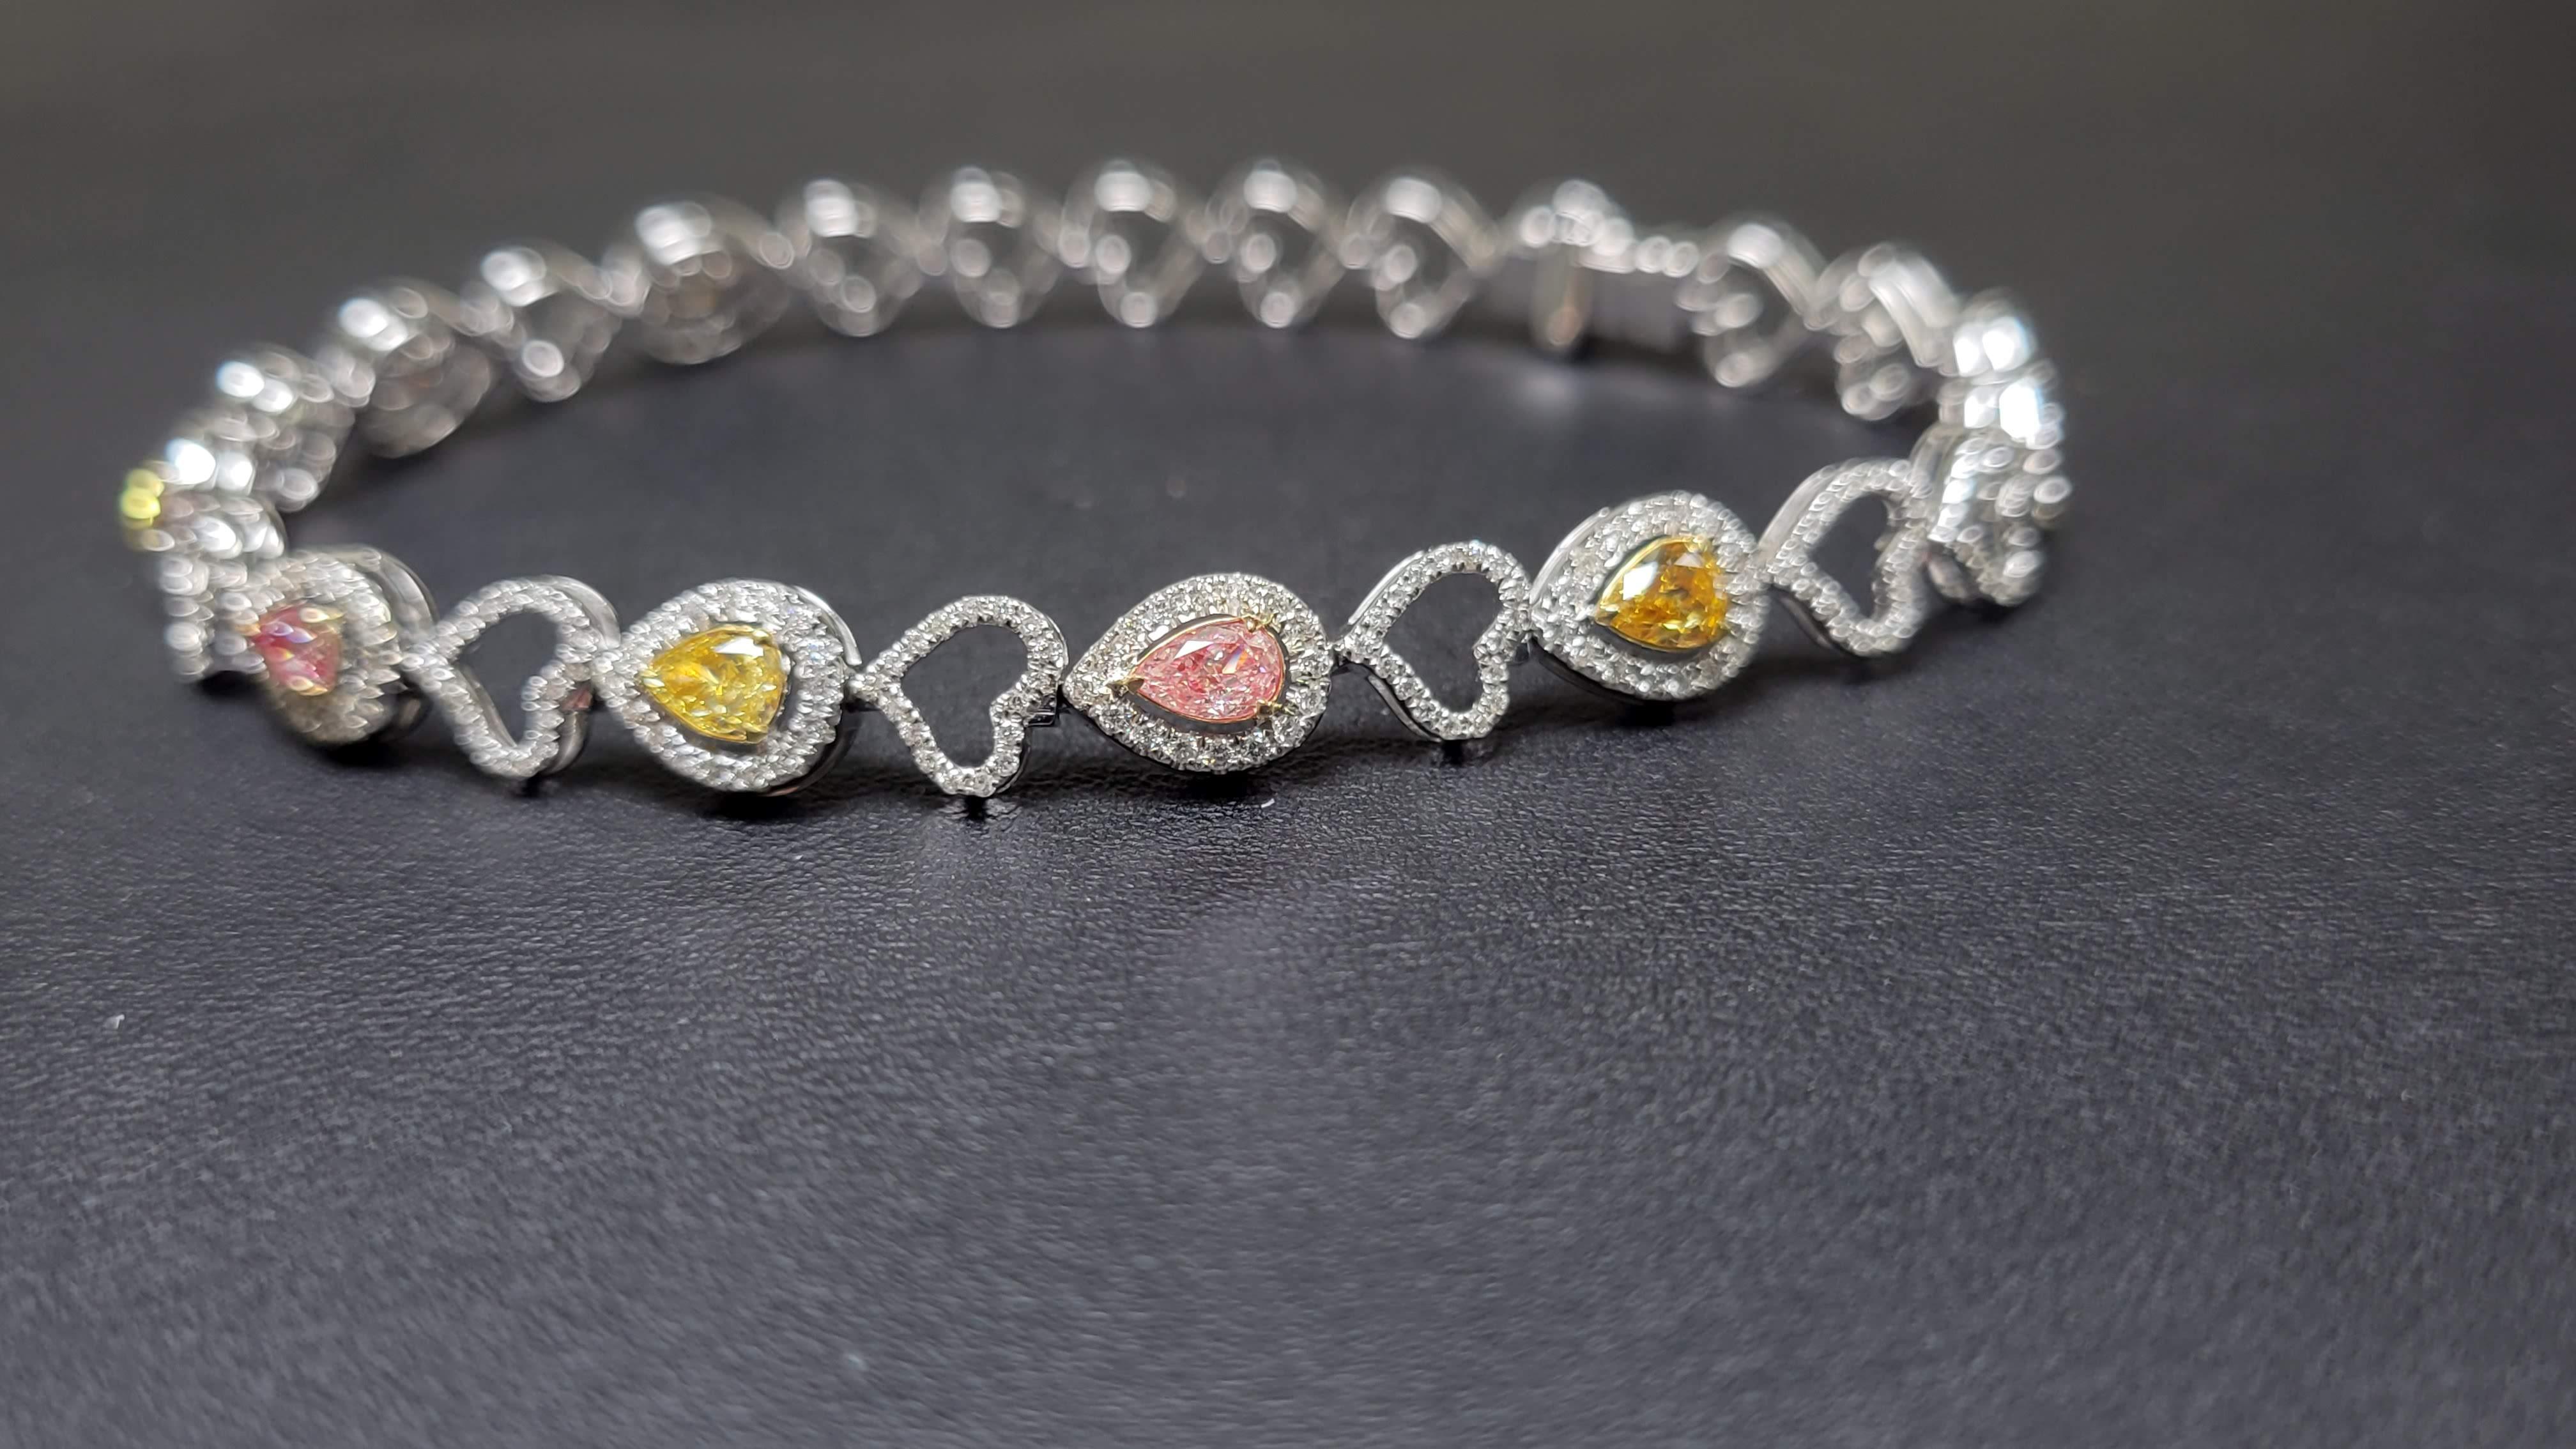 A beautiful array of mix colored and mix shape diamond bracelet mounted in 18K/W  gold, with 1.20cts in Fancy Color Diamonds, and about 1.19cts in White Diamond weight. Diamonds, totaling 2.39cts in weight both color and white diamonds. The